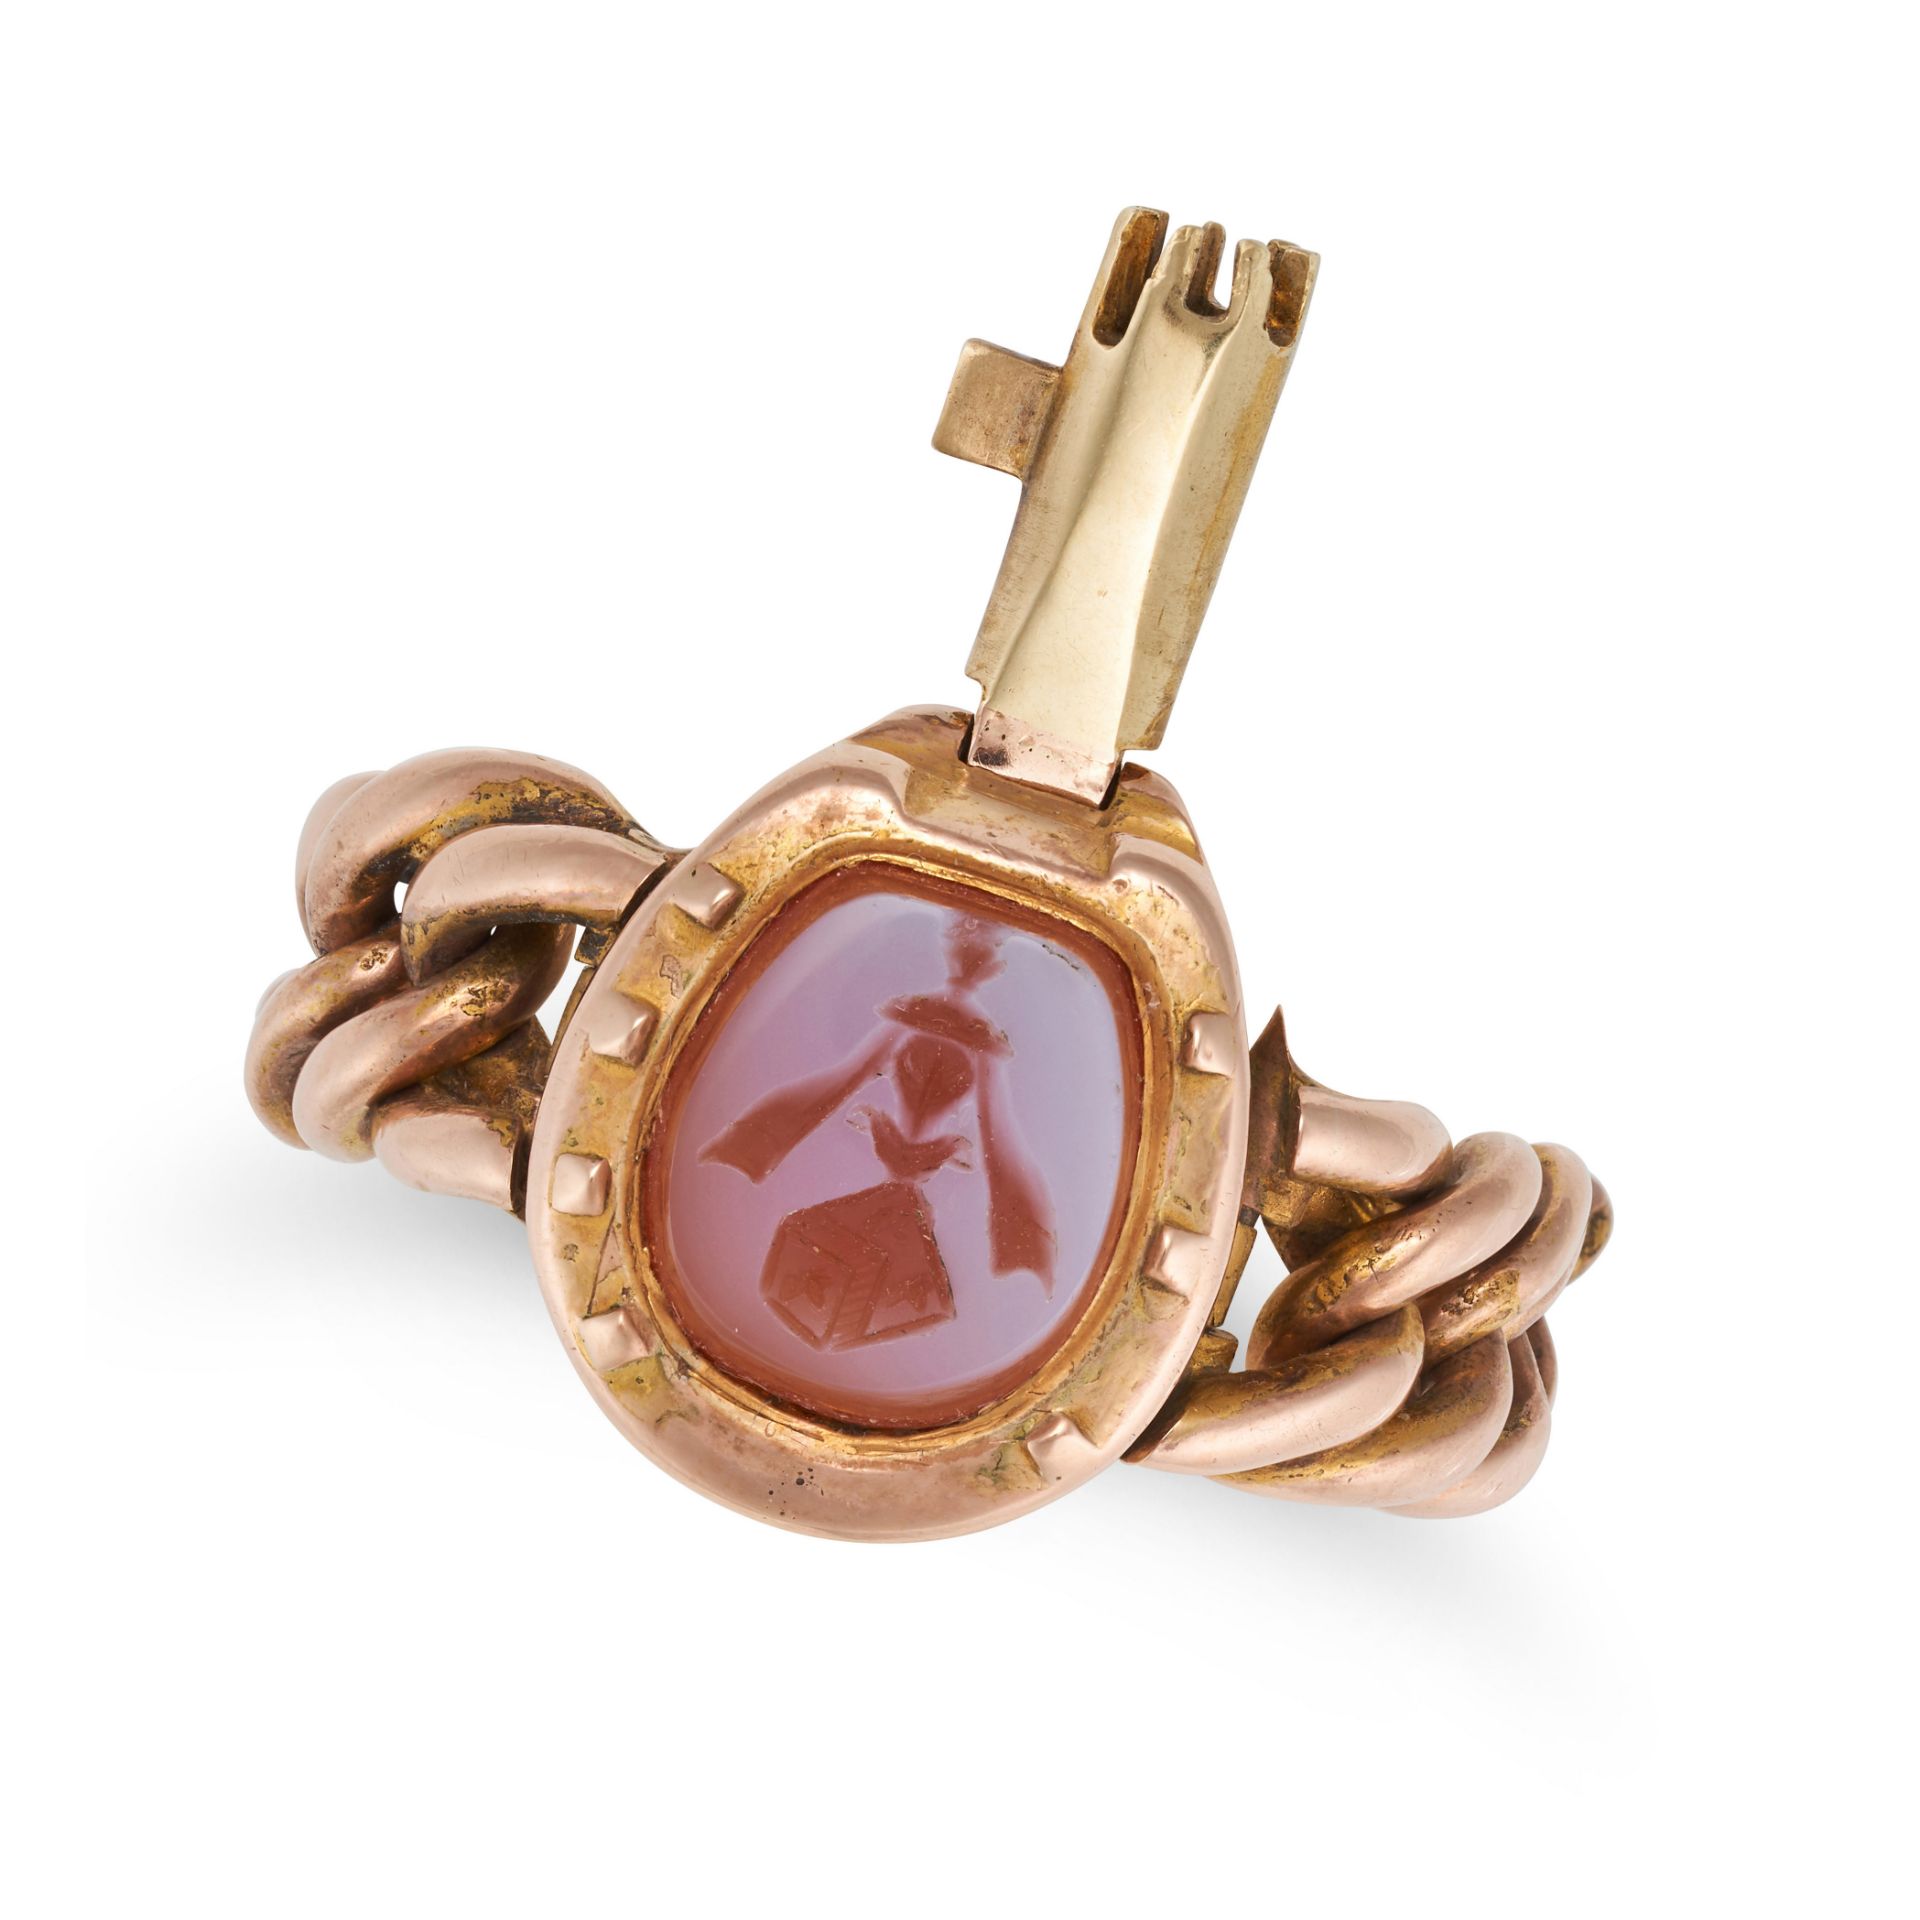 A CARNELIAN INTAGLIO POISON RING in 18ct yellow gold, set with a carnelian intaglio within a hors... - Image 2 of 2